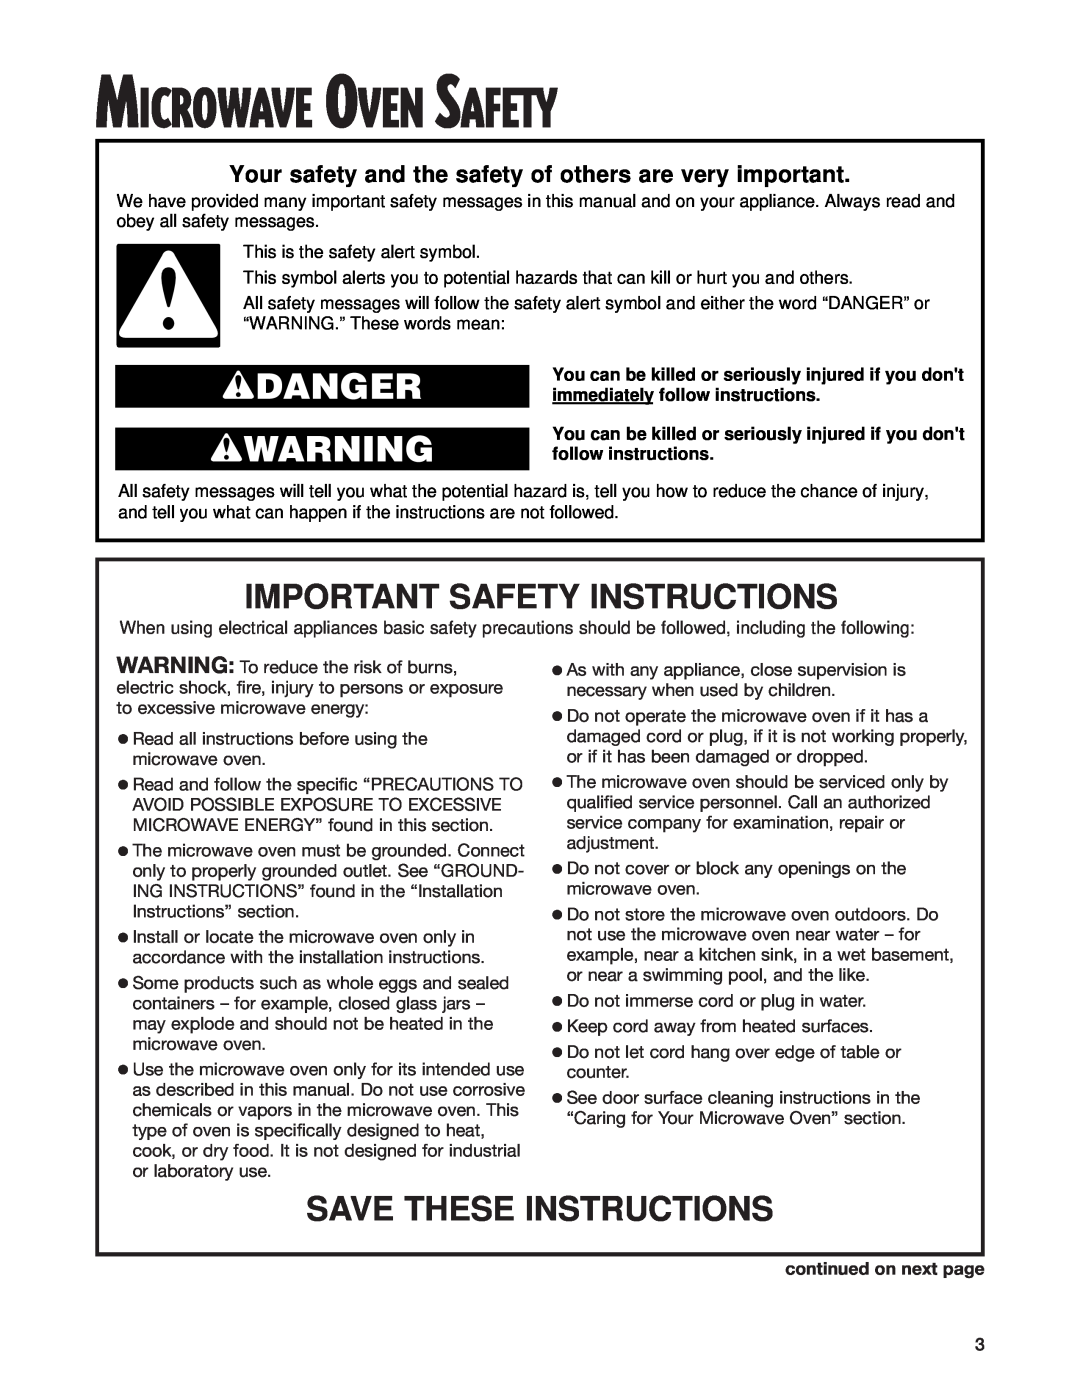 Whirlpool MT1111SK Microwave Oven Safety, wDANGER wWARNING, Important Safety Instructions, Save These Instructions 